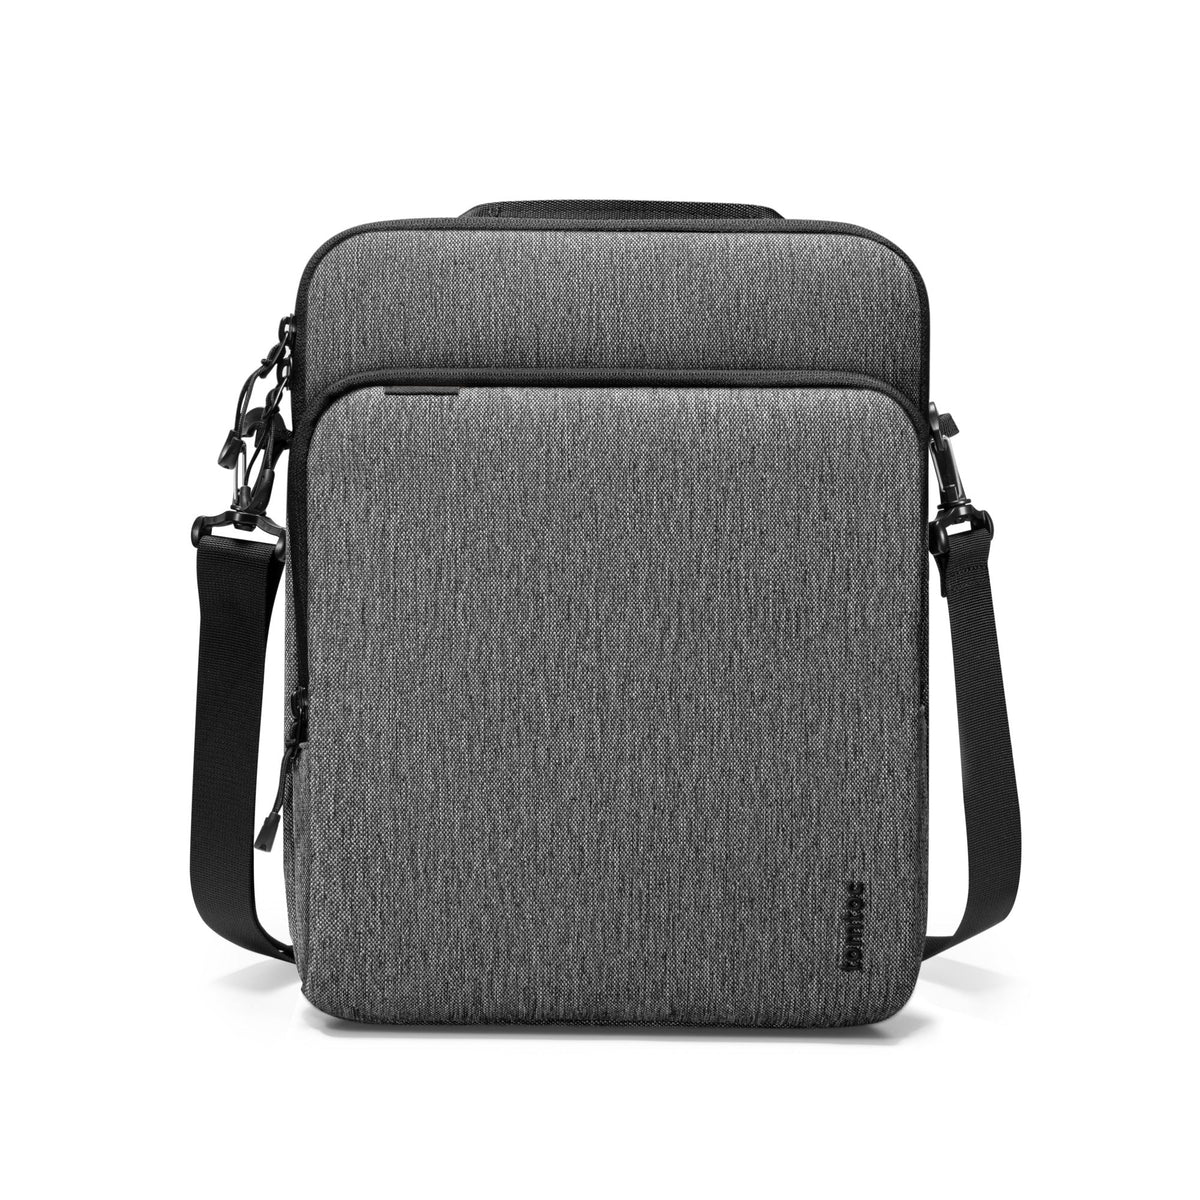 primary_DefenderACE-B03 Tablet Shoulder Bag for 11-inch iPad Pro | Gray